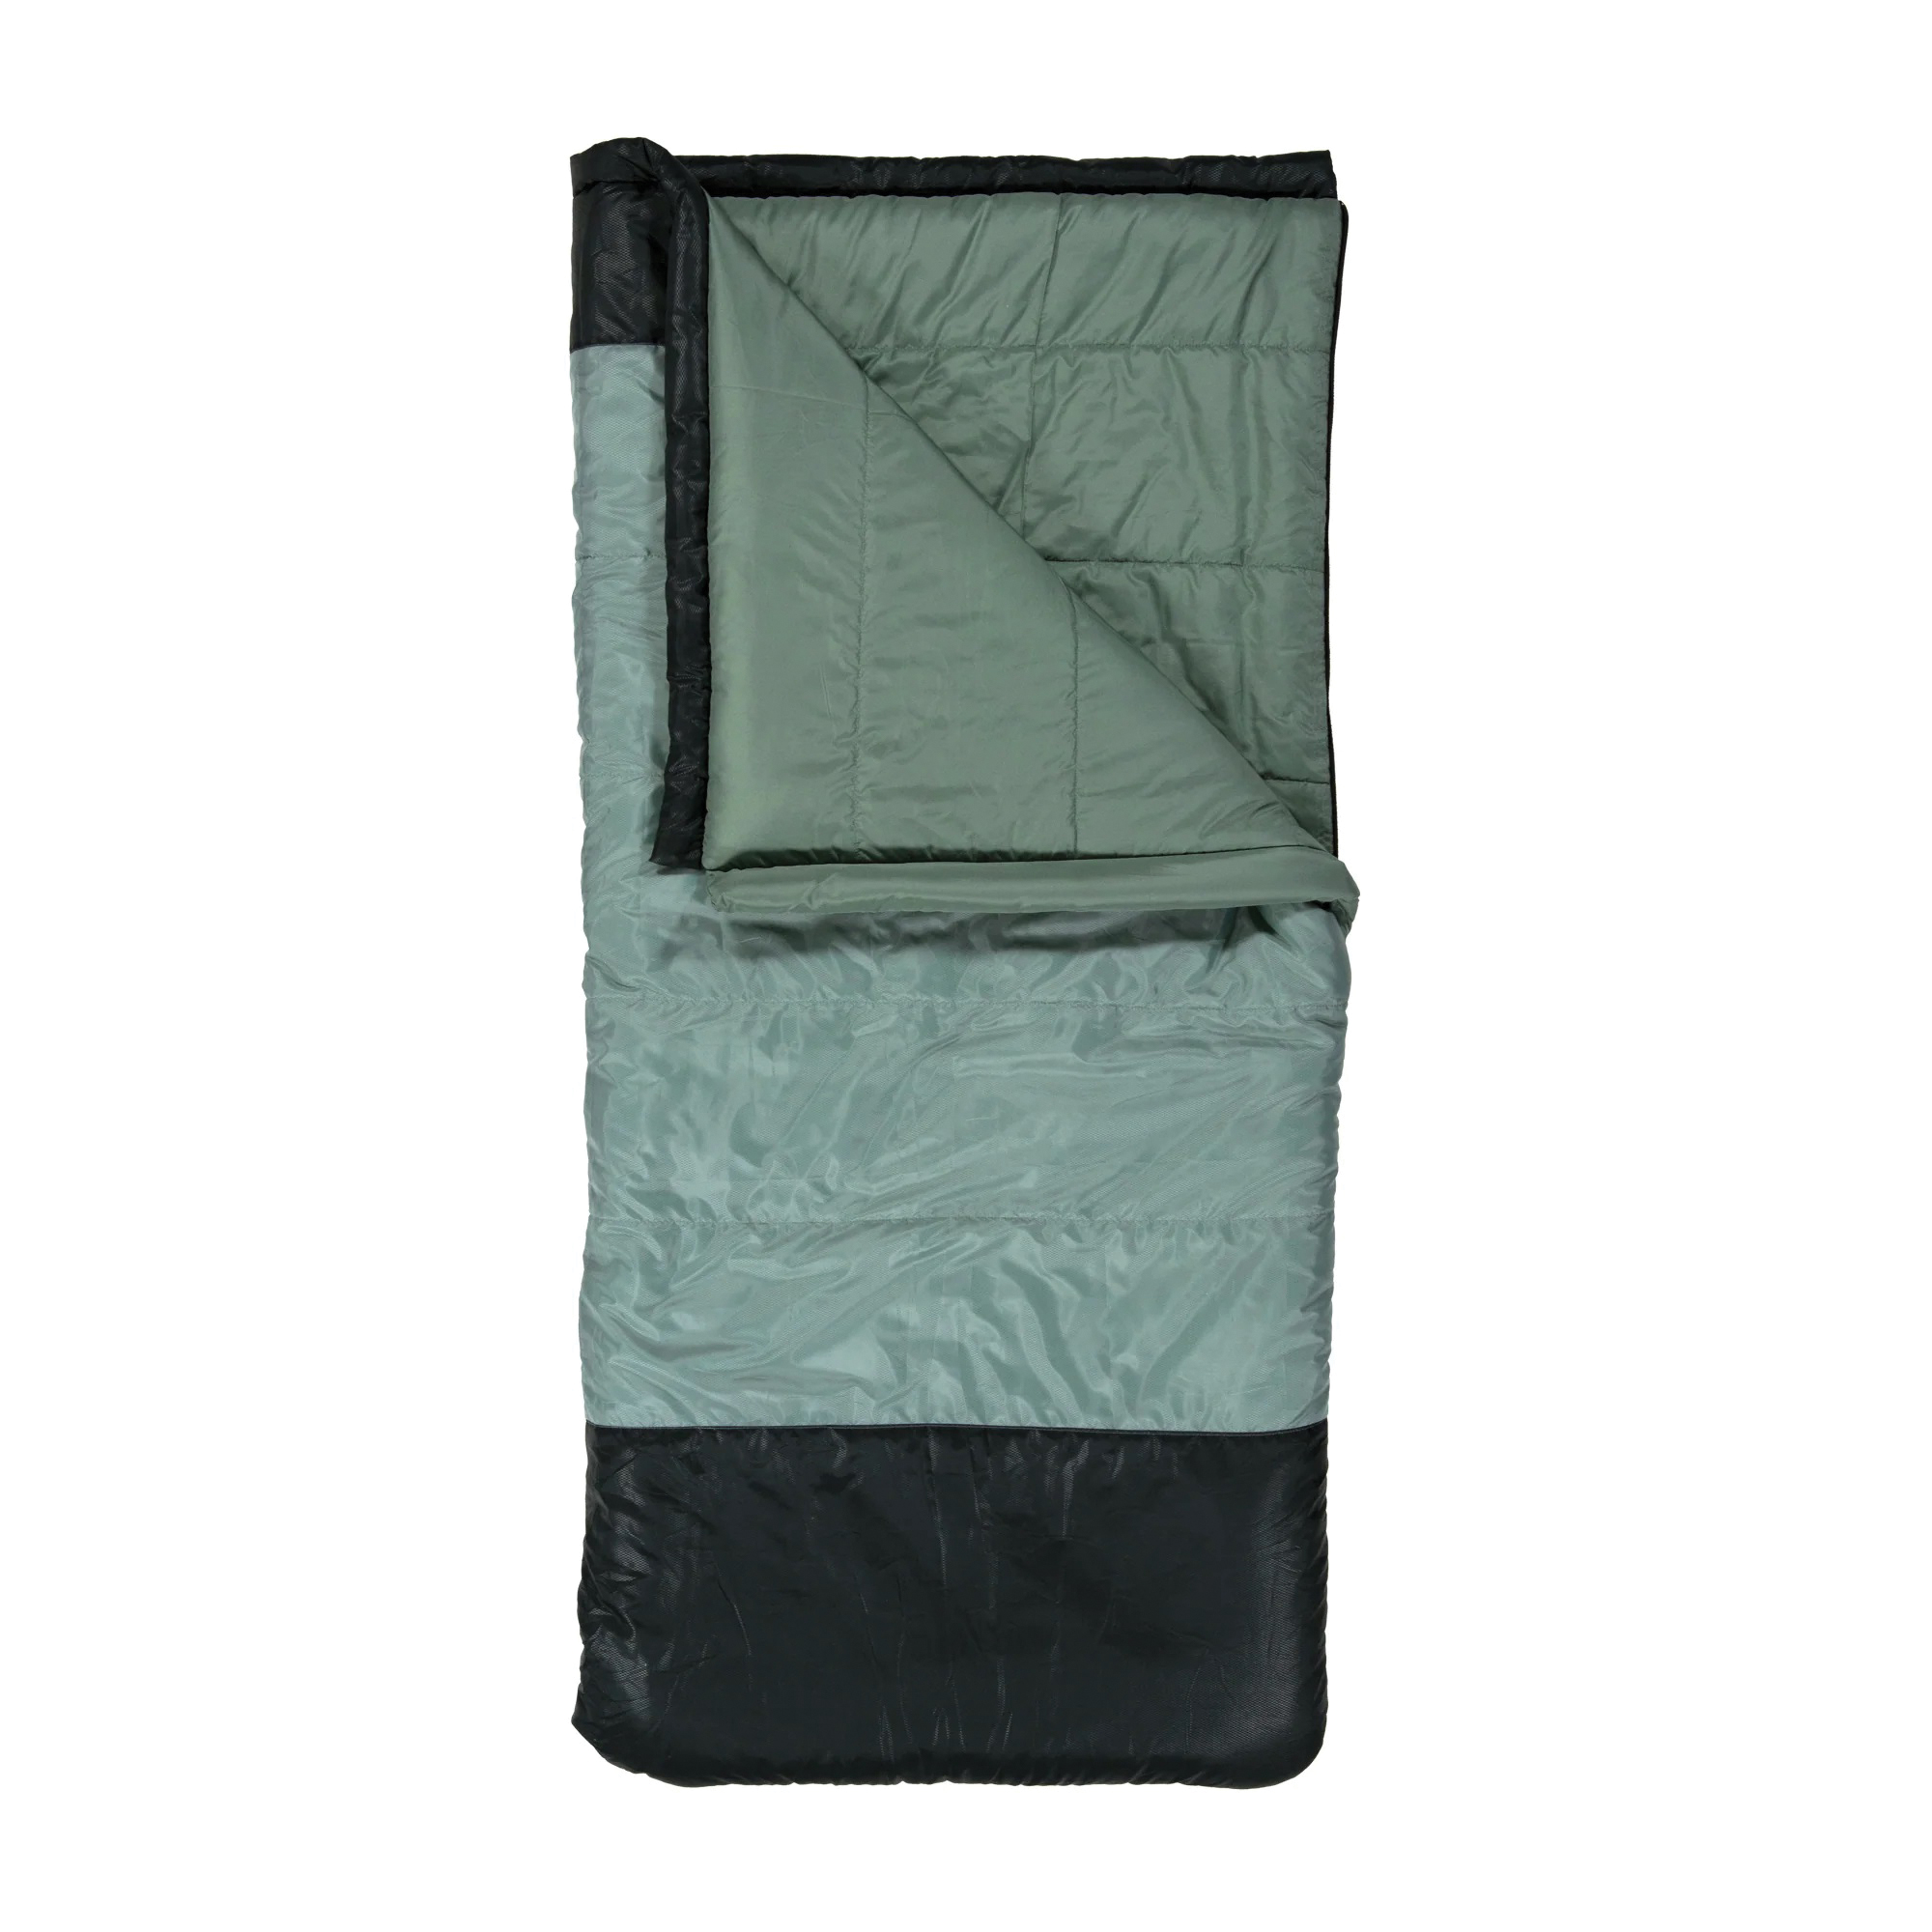 Klymit Wold Aspen 20 13WRGR20D Sleeping Bag, 74 in L, 34 in W, Rectangle, Polyester, Green - 2